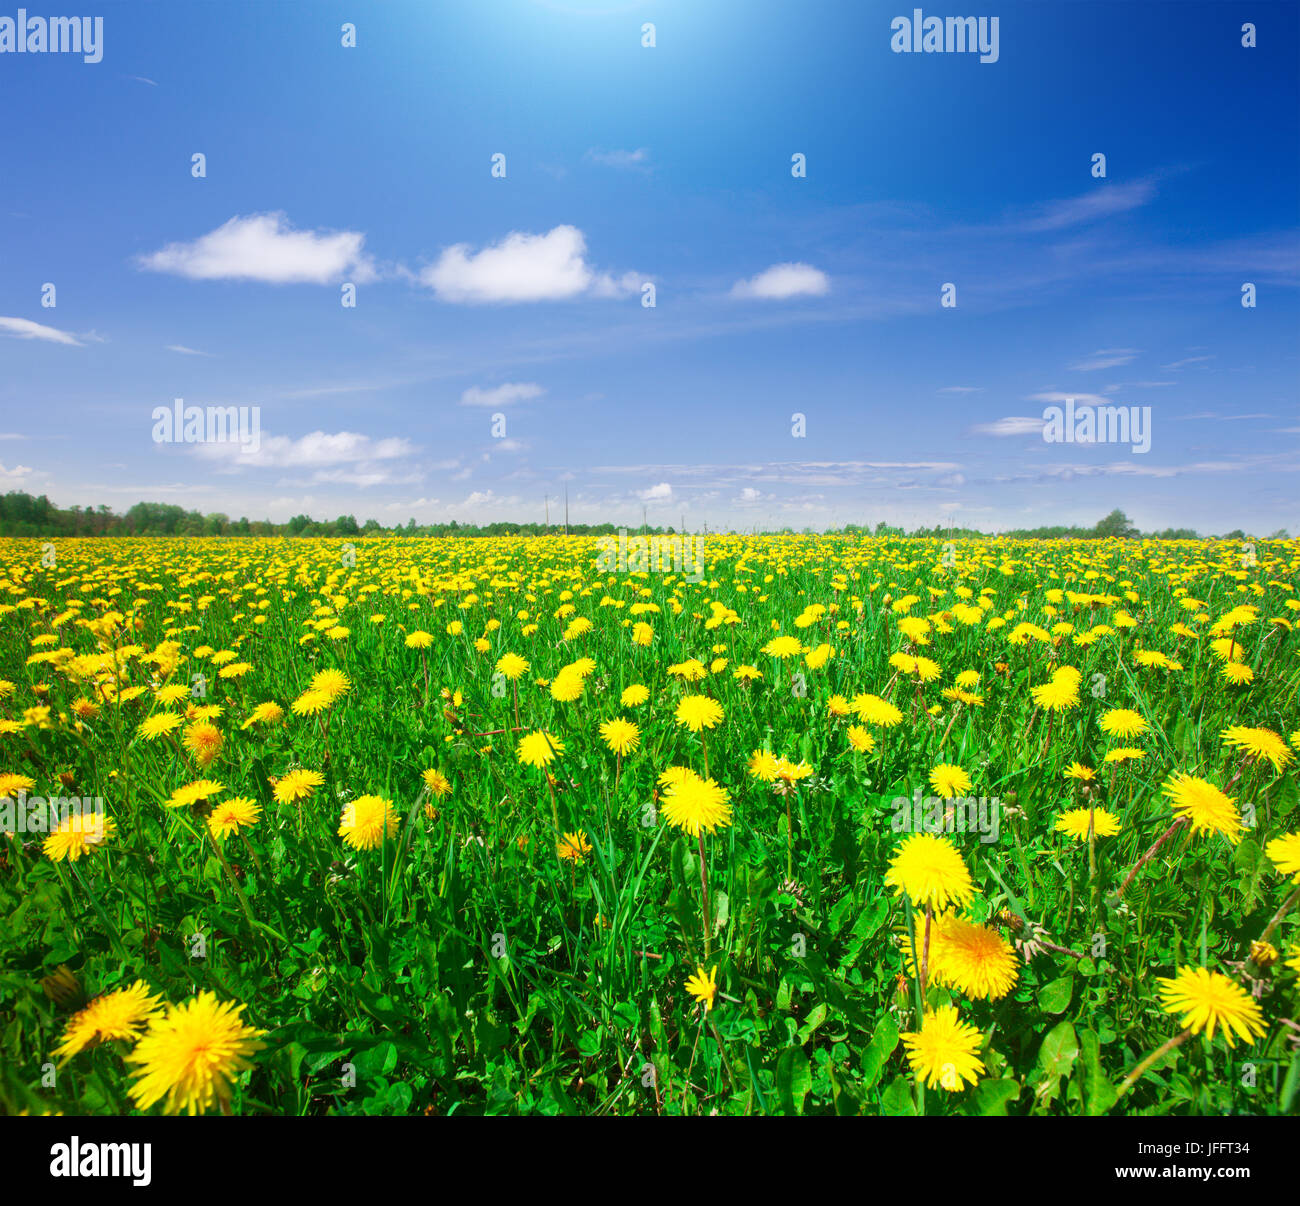 Yellow flowers field under blue cloudy sky Stock Photo